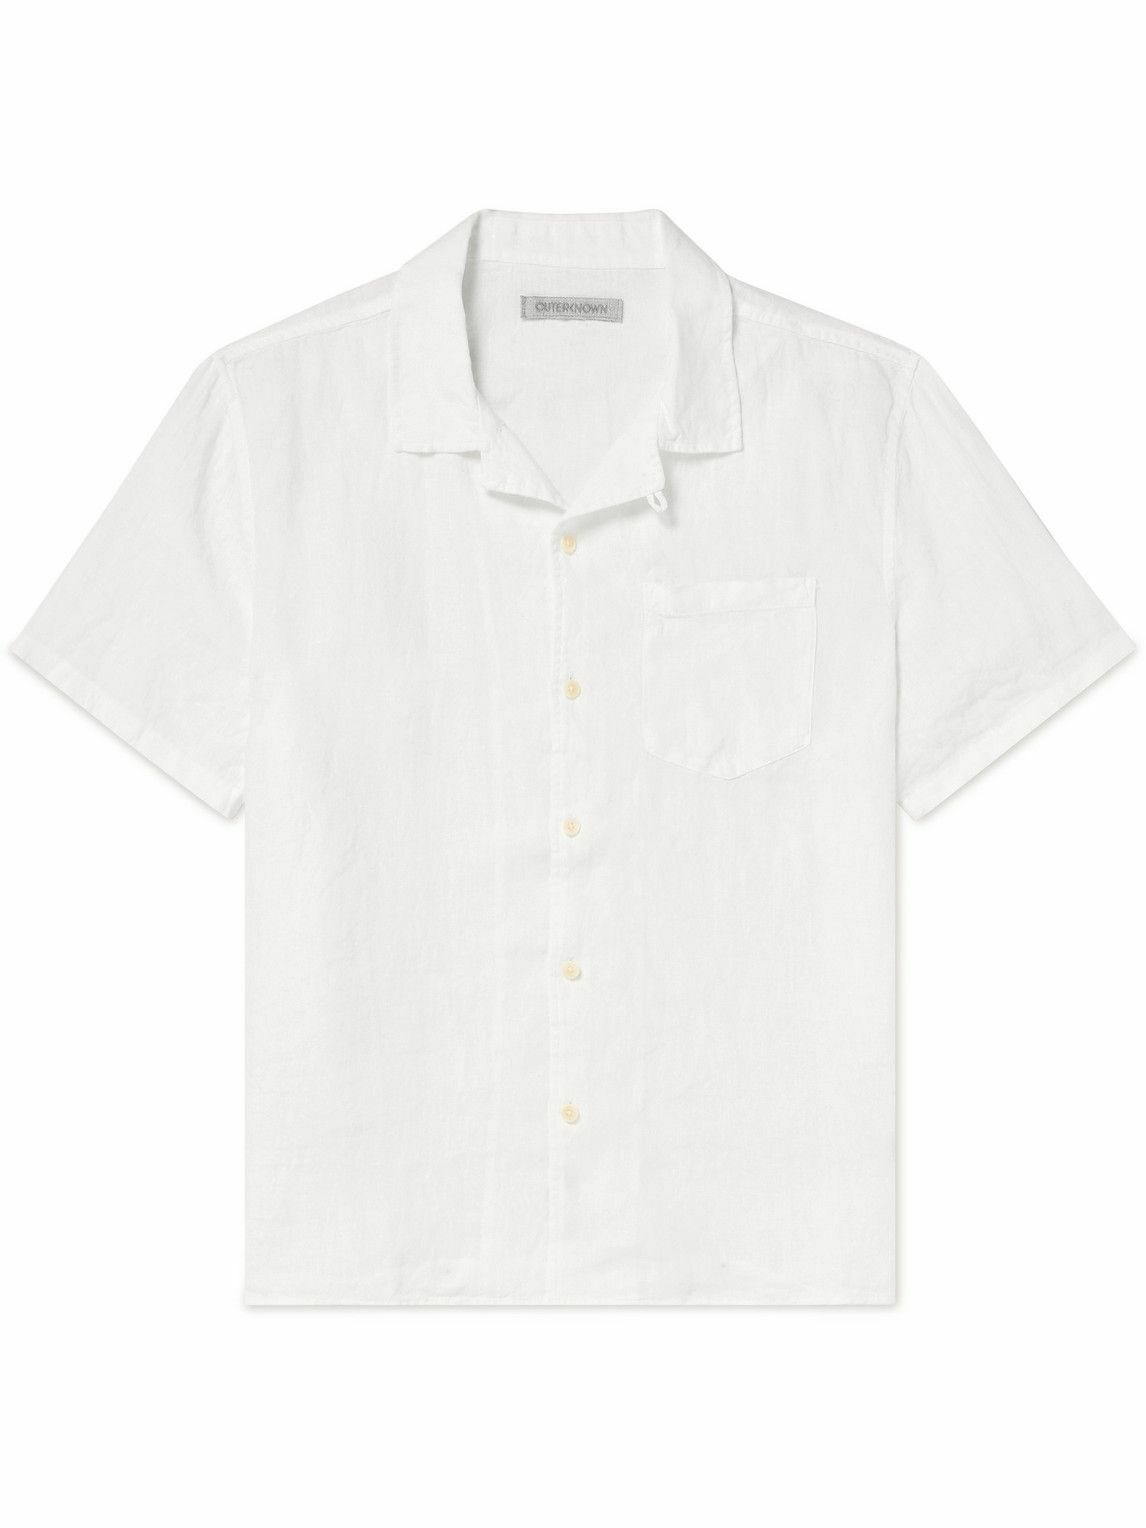 Outerknown - Convertible-Collar Linen Shirt - White Outerknown